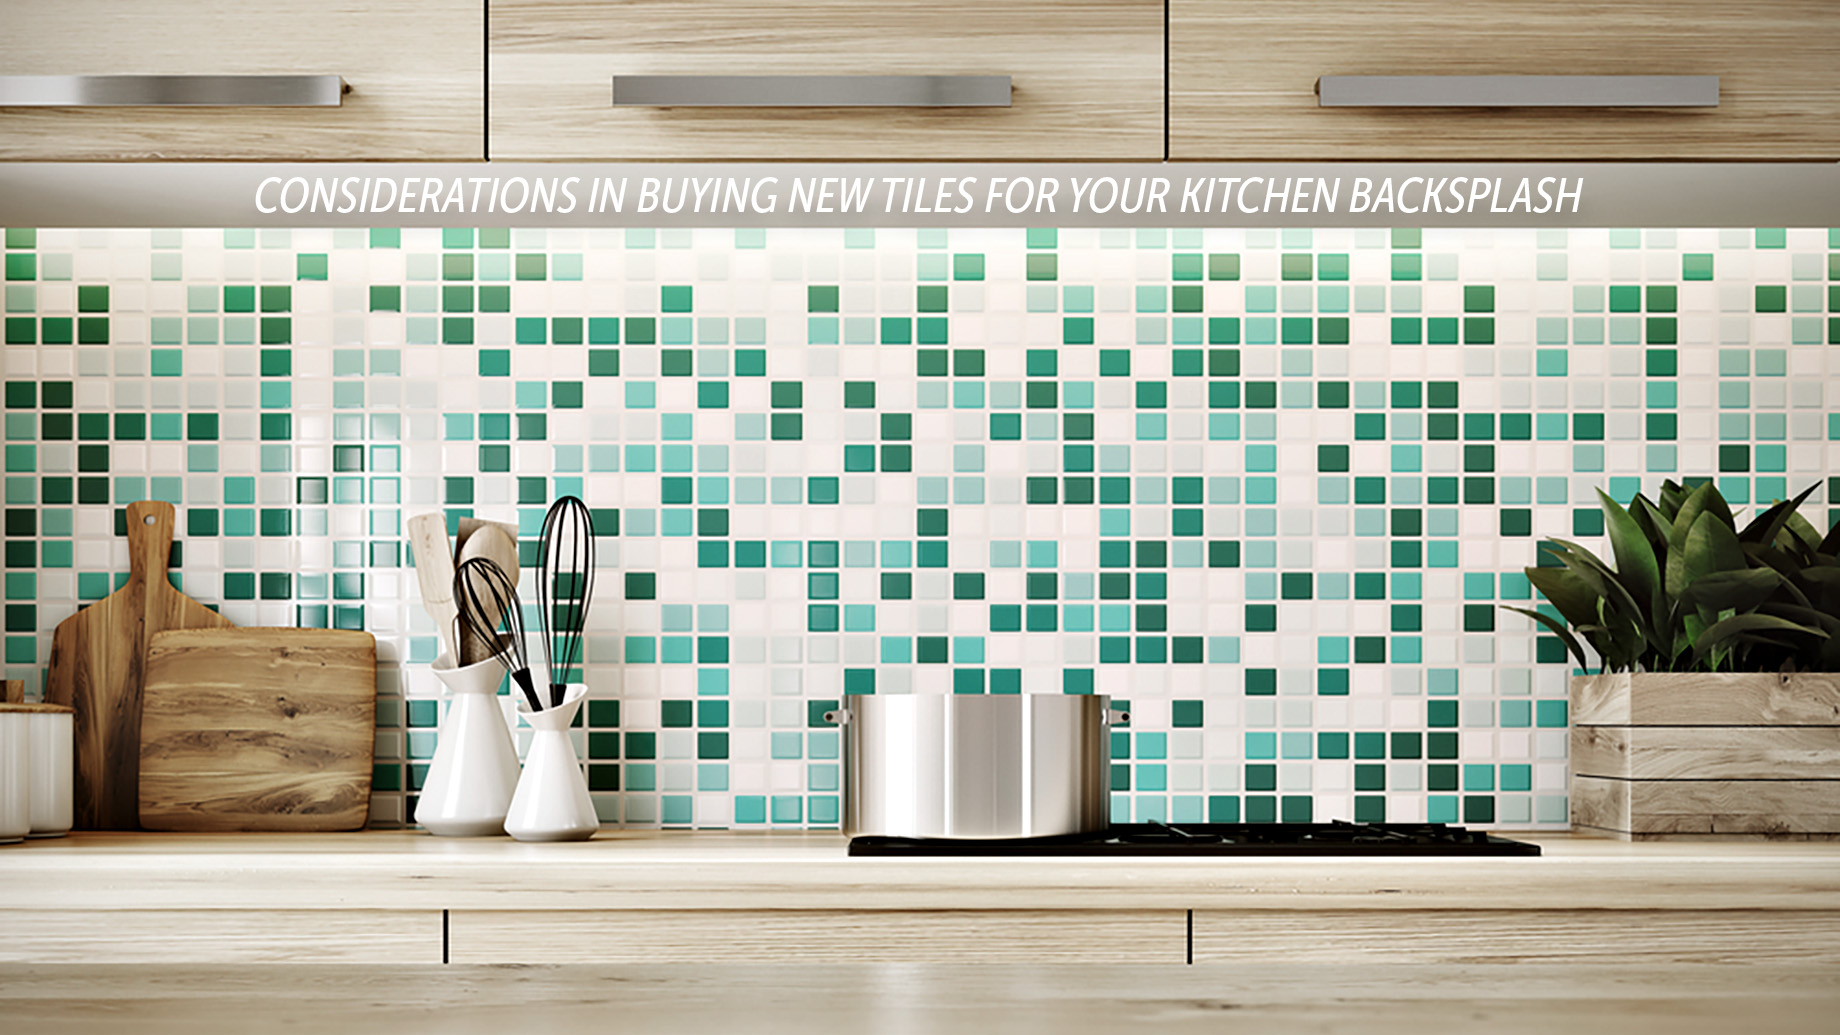 Interior Design Tips - Considerations in Buying New Tiles for Your Kitchen Backsplash